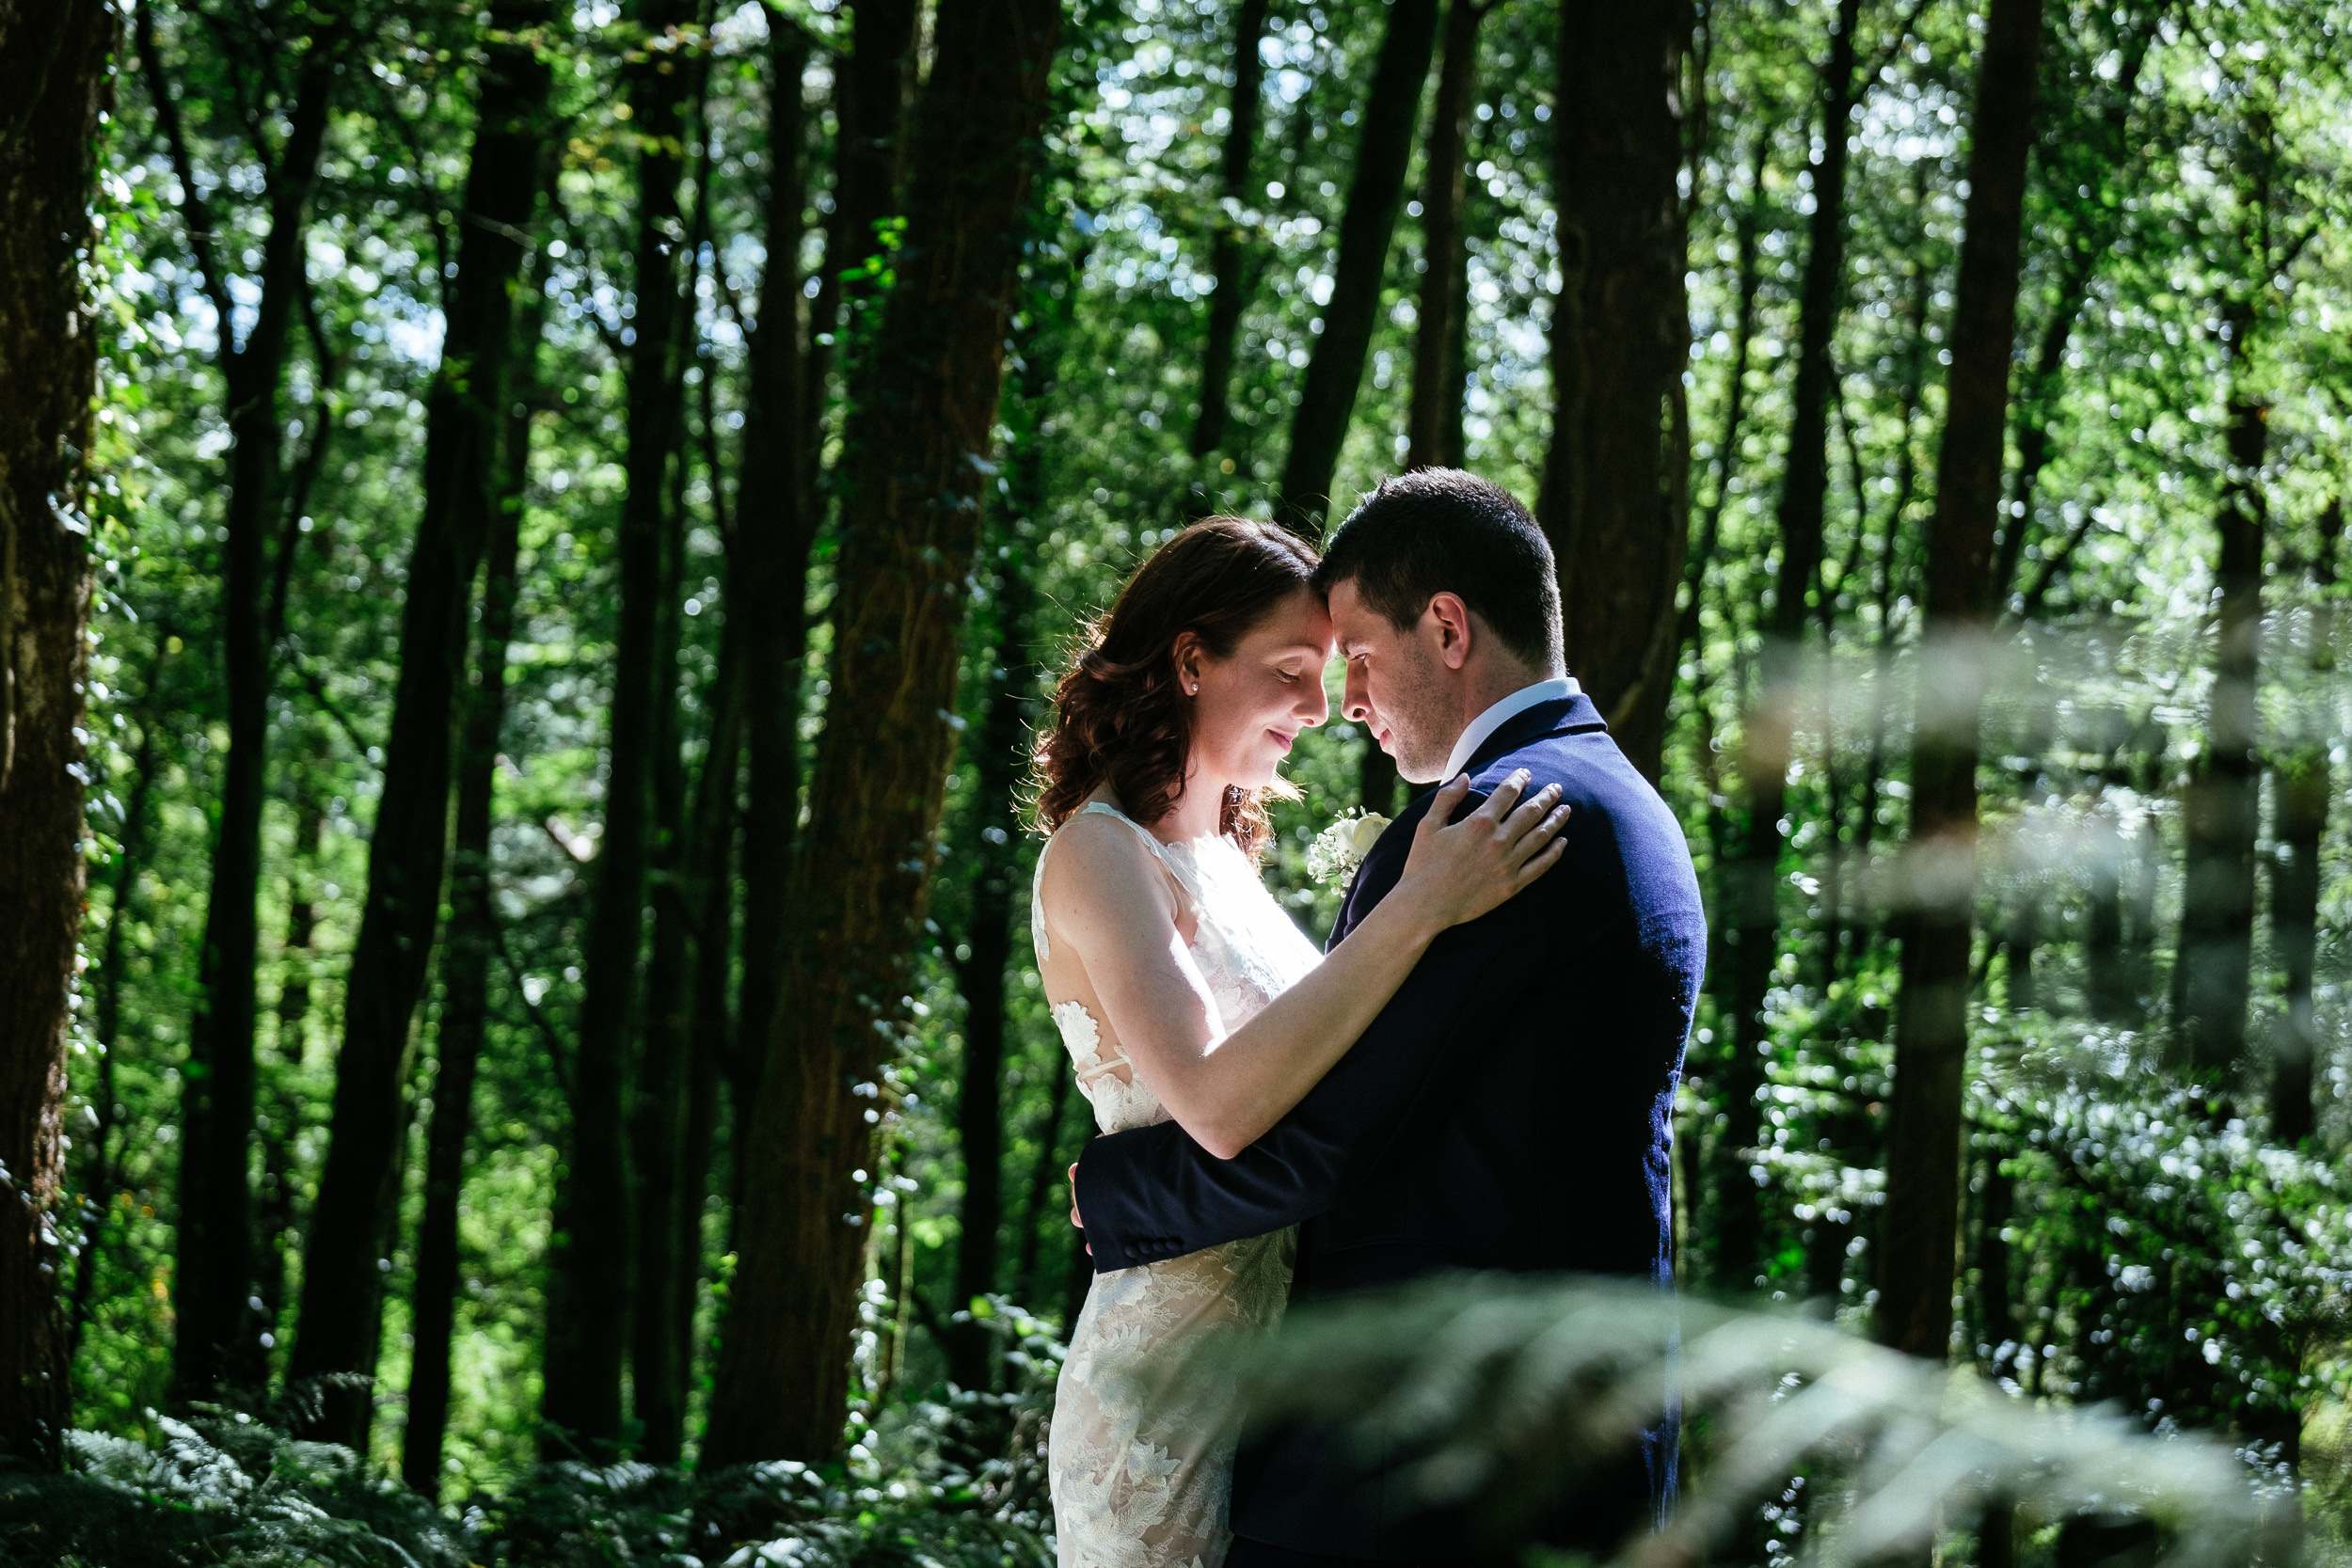 bride and groom embracing in a forest with sunlight filtering through the trees in county Cork Ireland after their Dunmore House Hotel wedding